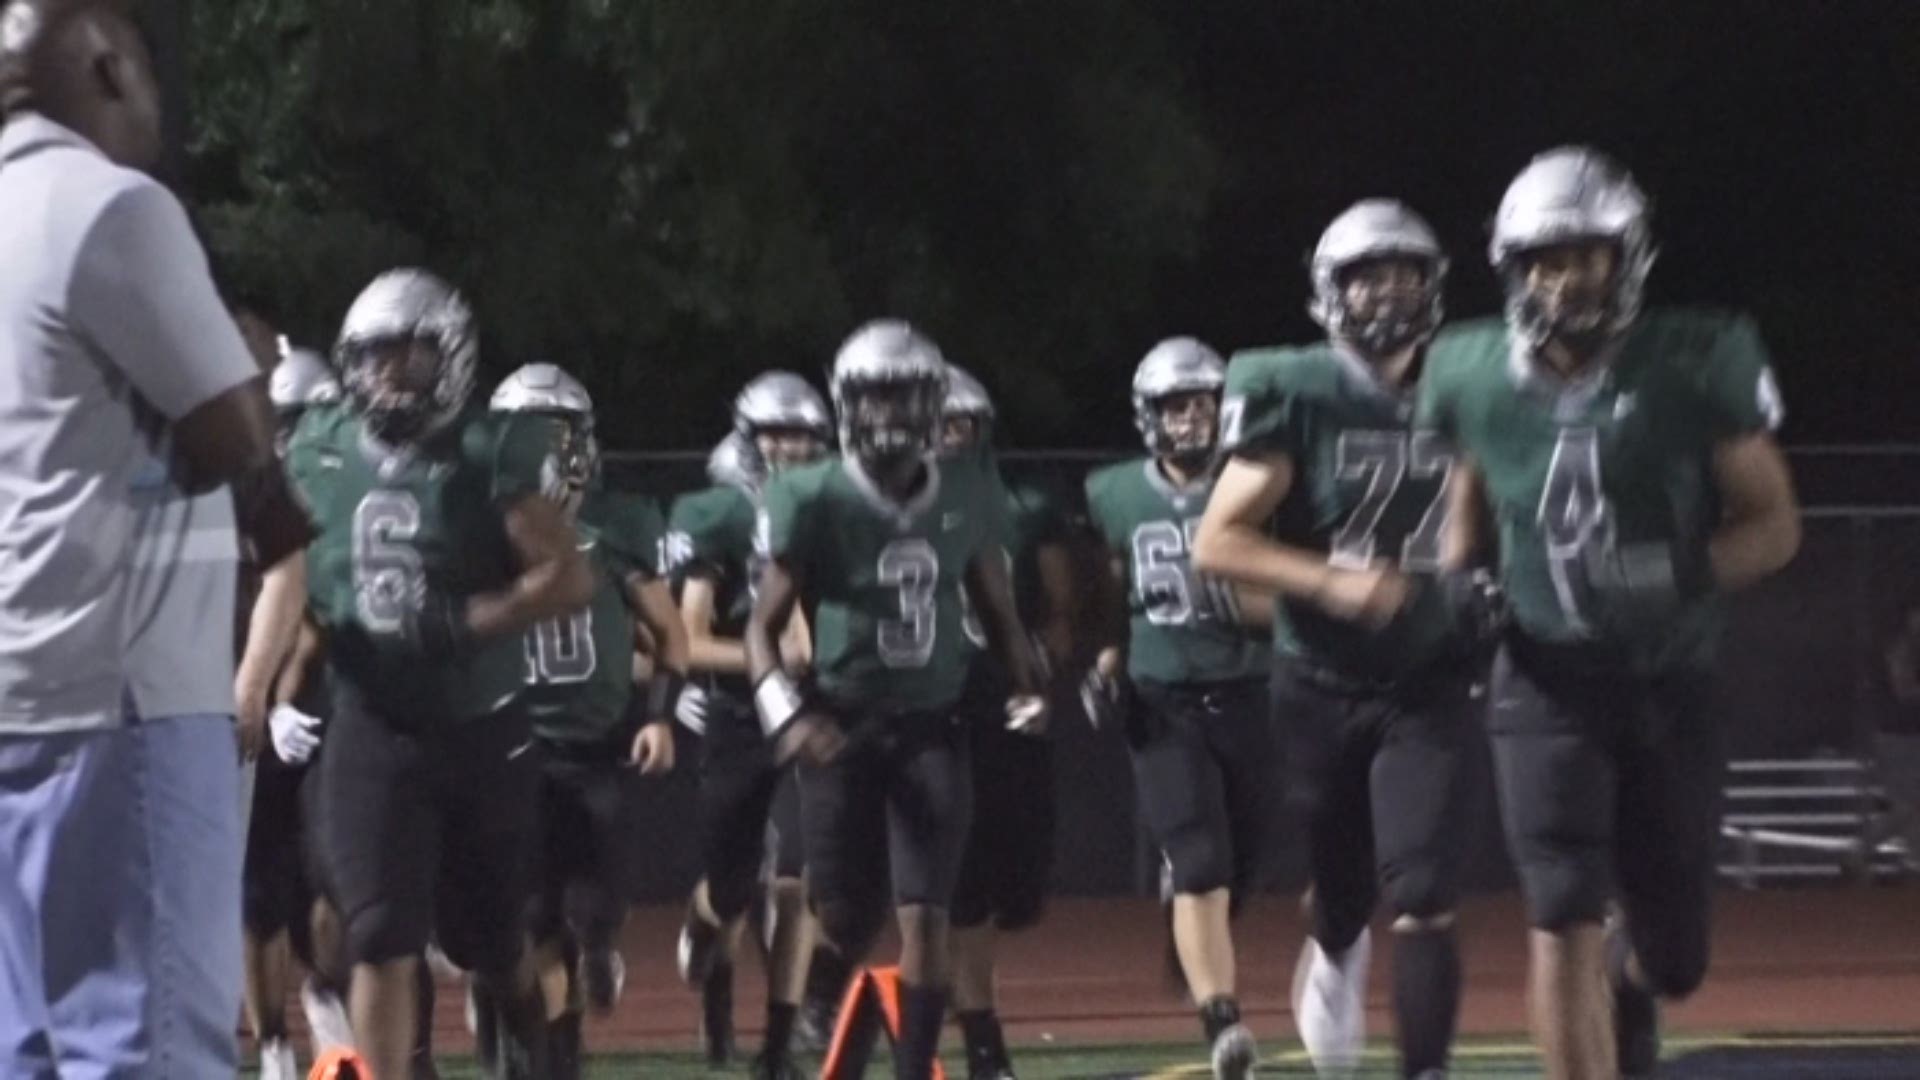 The Granite Bay Grizzlies showed plenty of bite on defense, but couldn't get much going offensively in Friday's 9-3 loss to Danville's Monte Vista to open the 2018 high school football season.